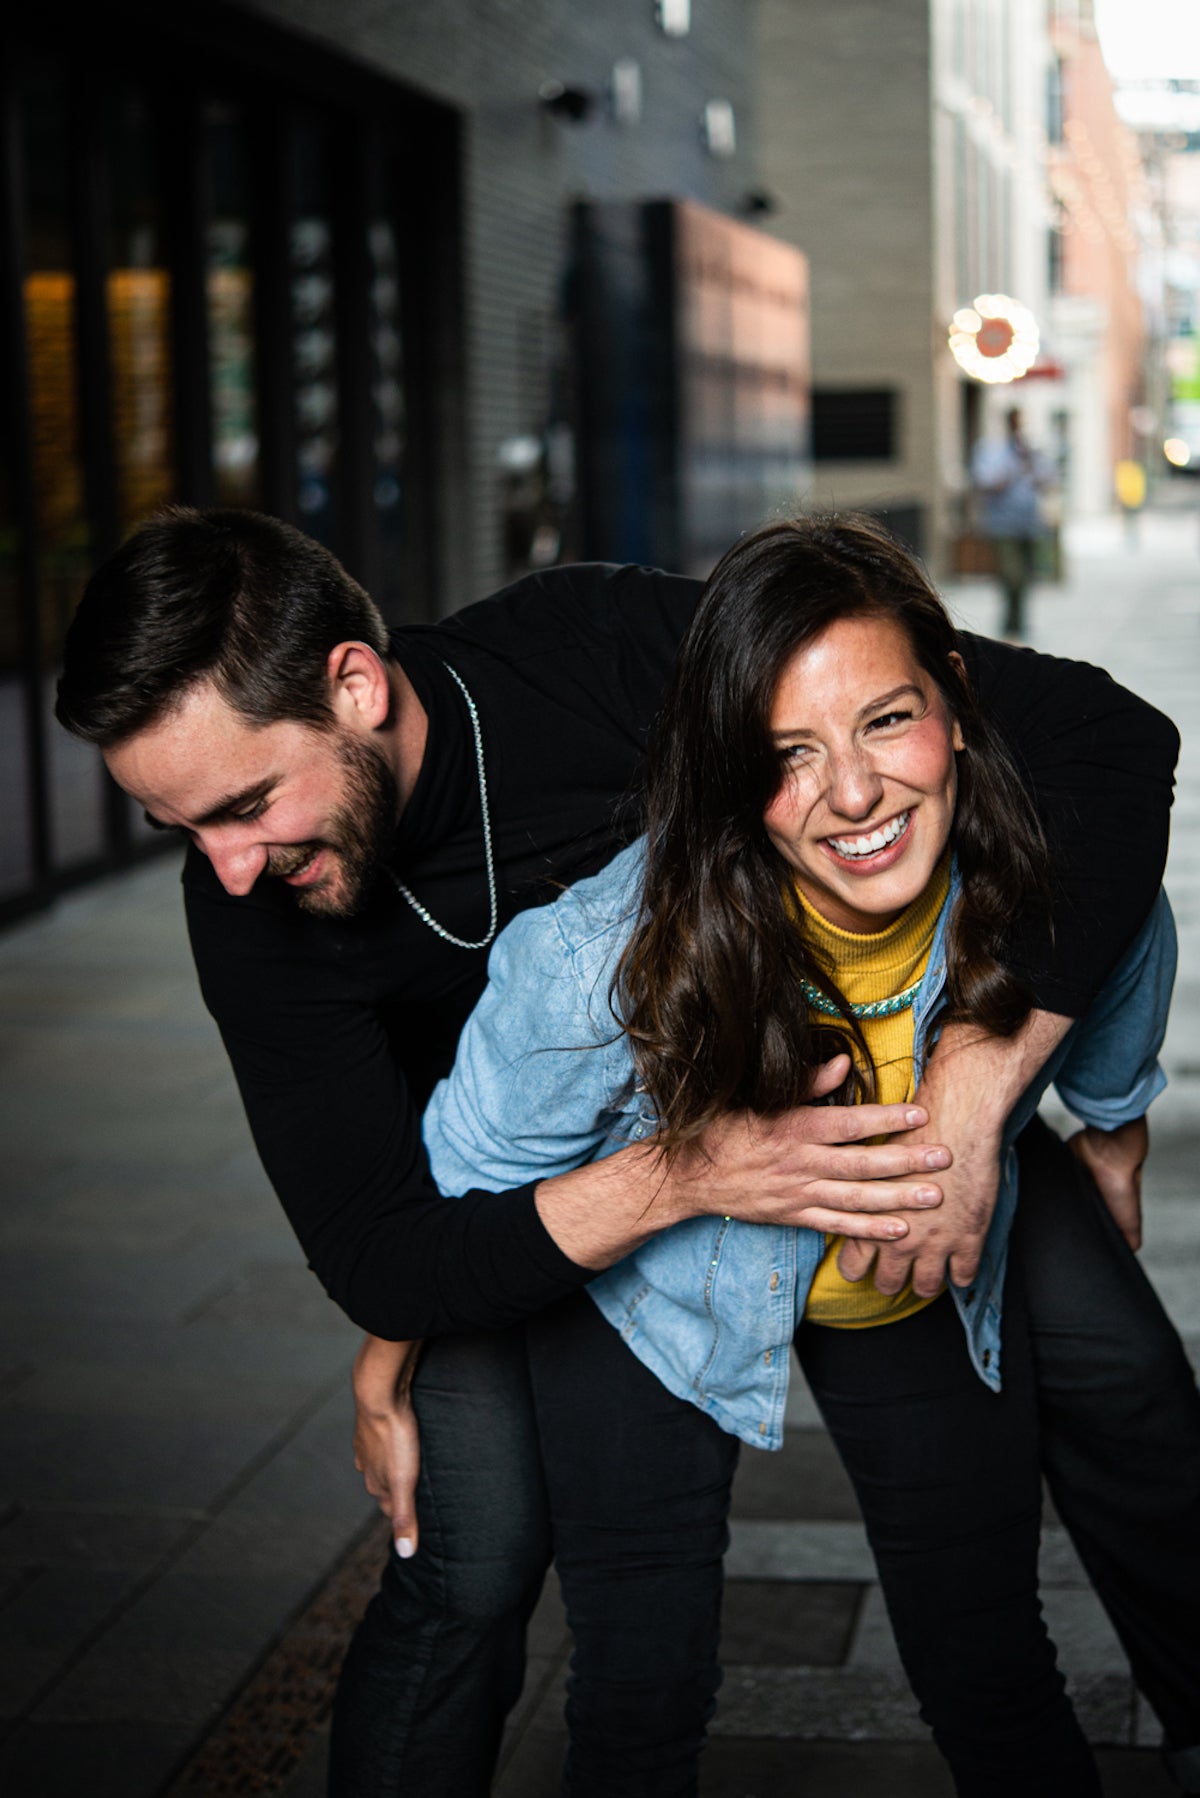 Young woman laughing as she tries to give boyfriend a piggyback ride